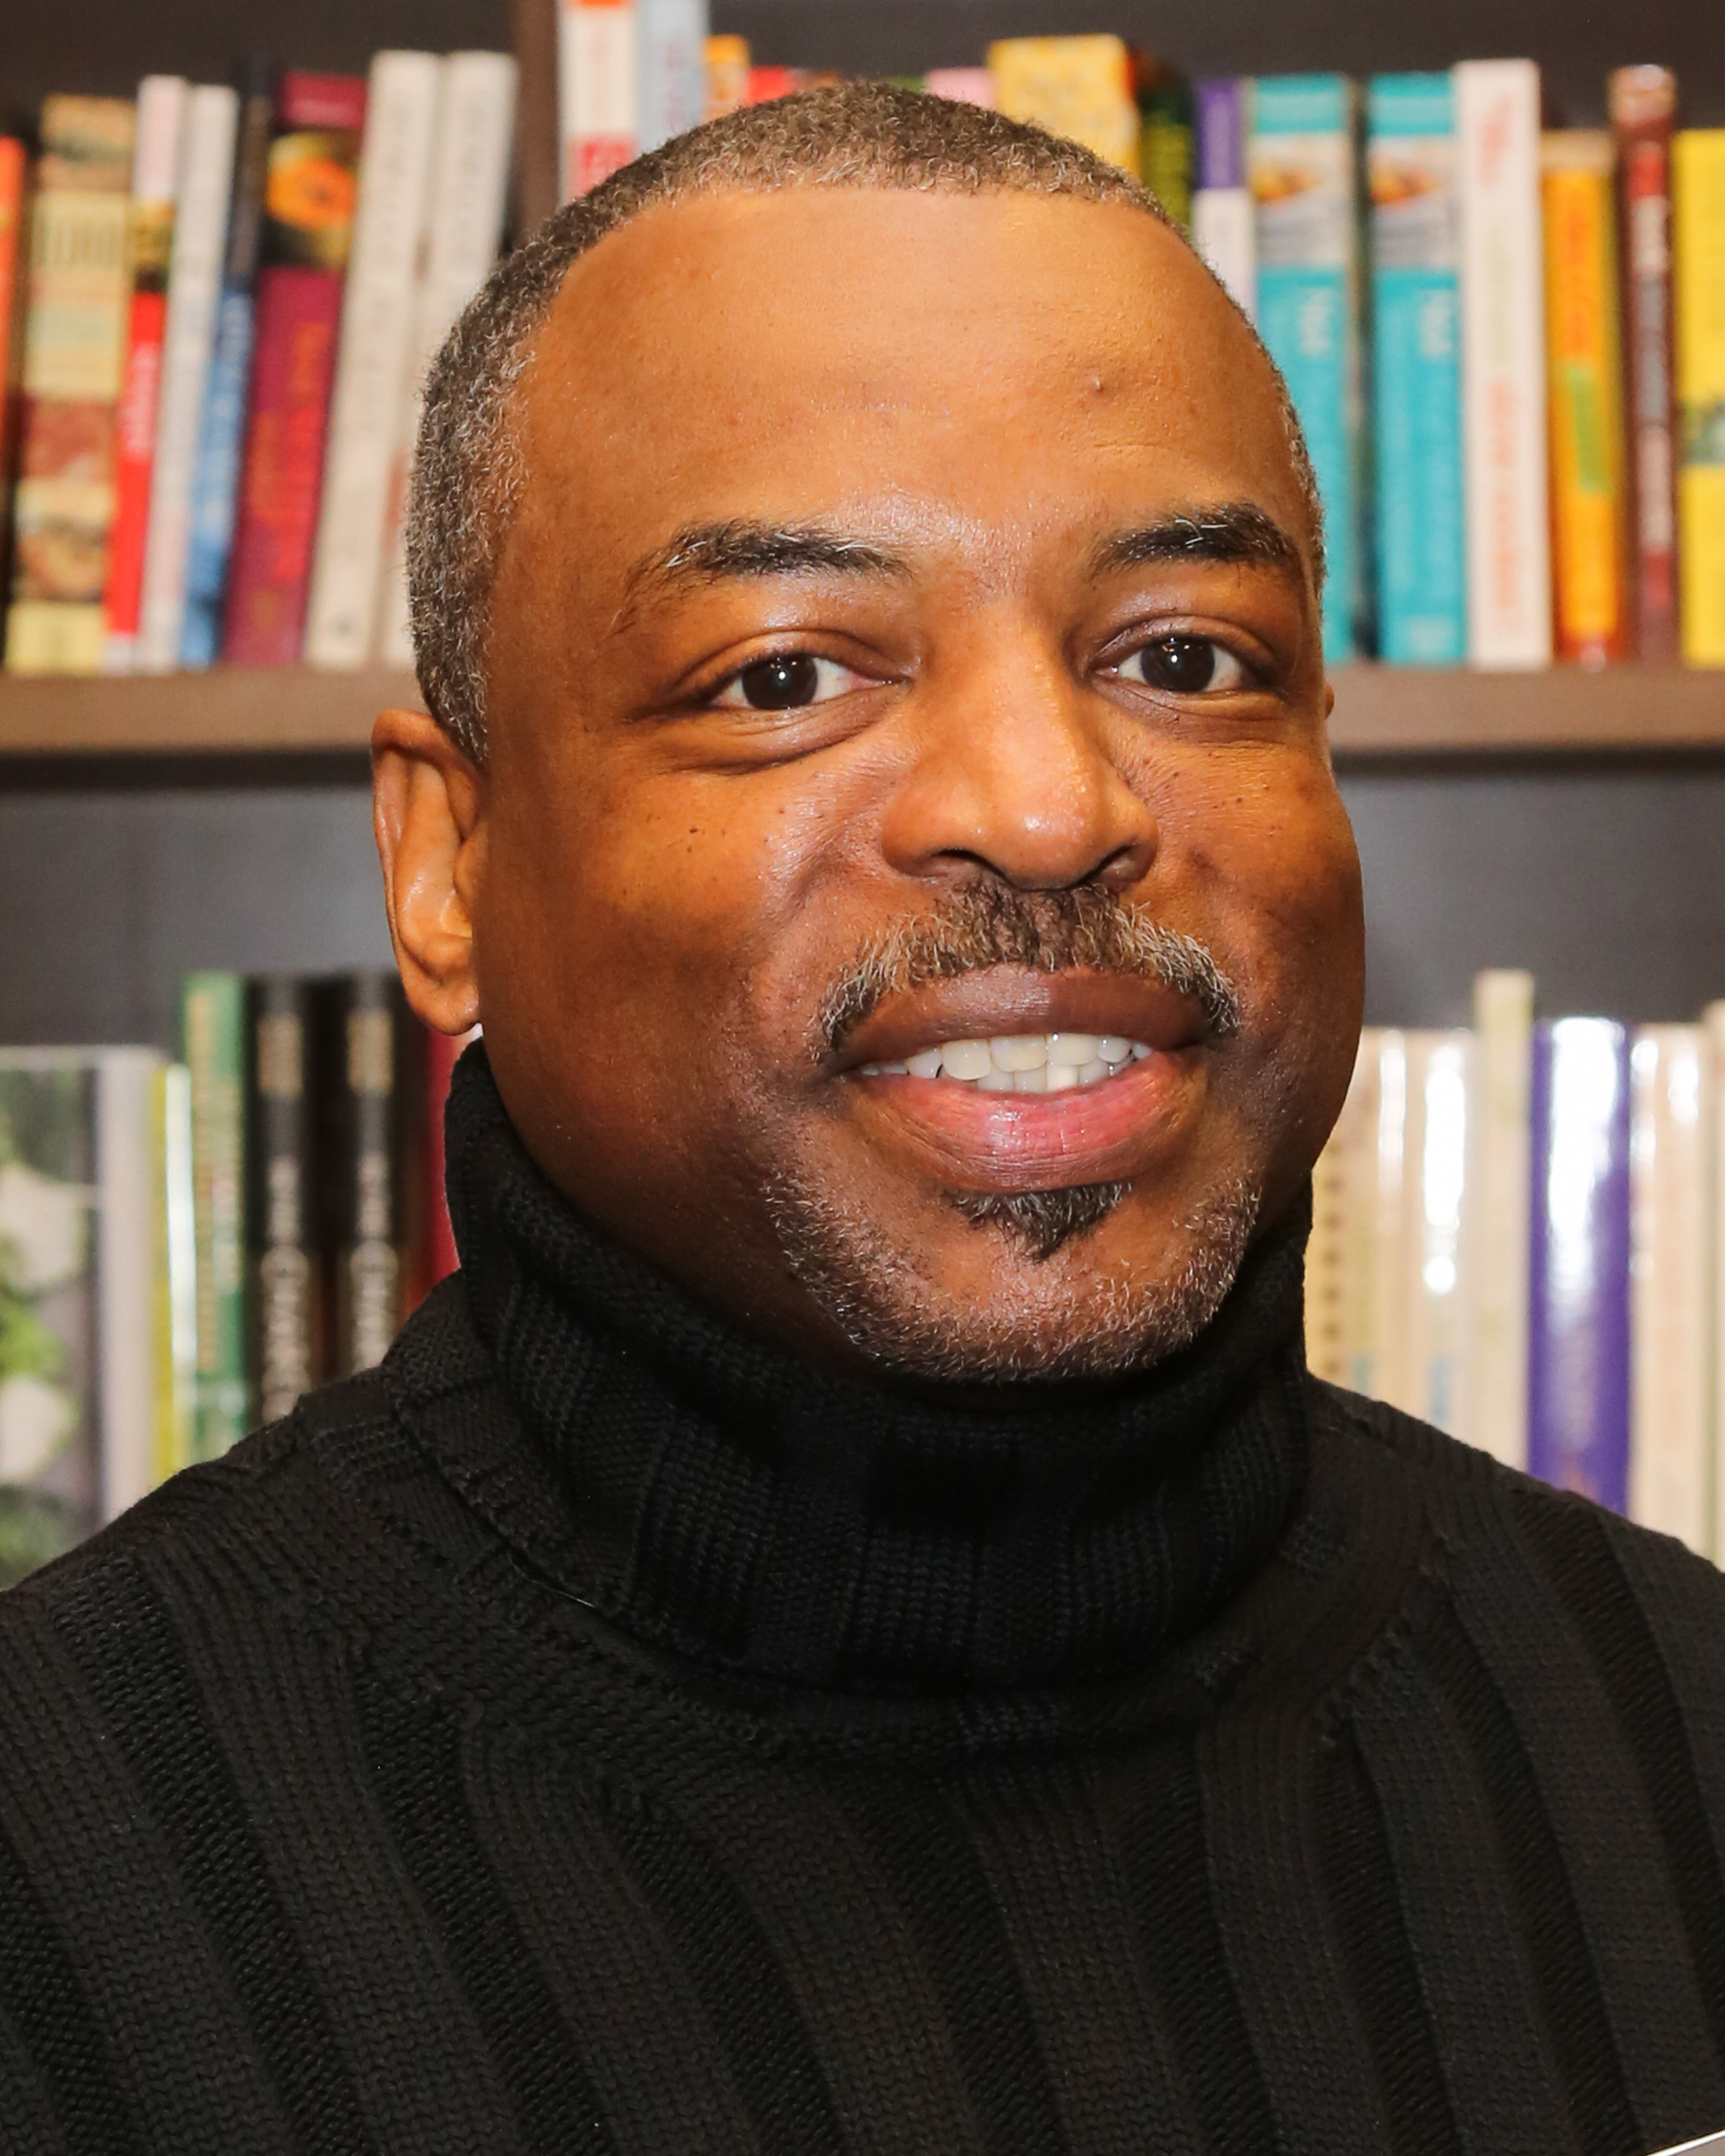 Actor LeVar Burton signs and discusses his new book "The Rhino Who Swallowed A Storm" at Barnes &amp; Noble Booksellers on December 20, 2014 in Burbank, California.